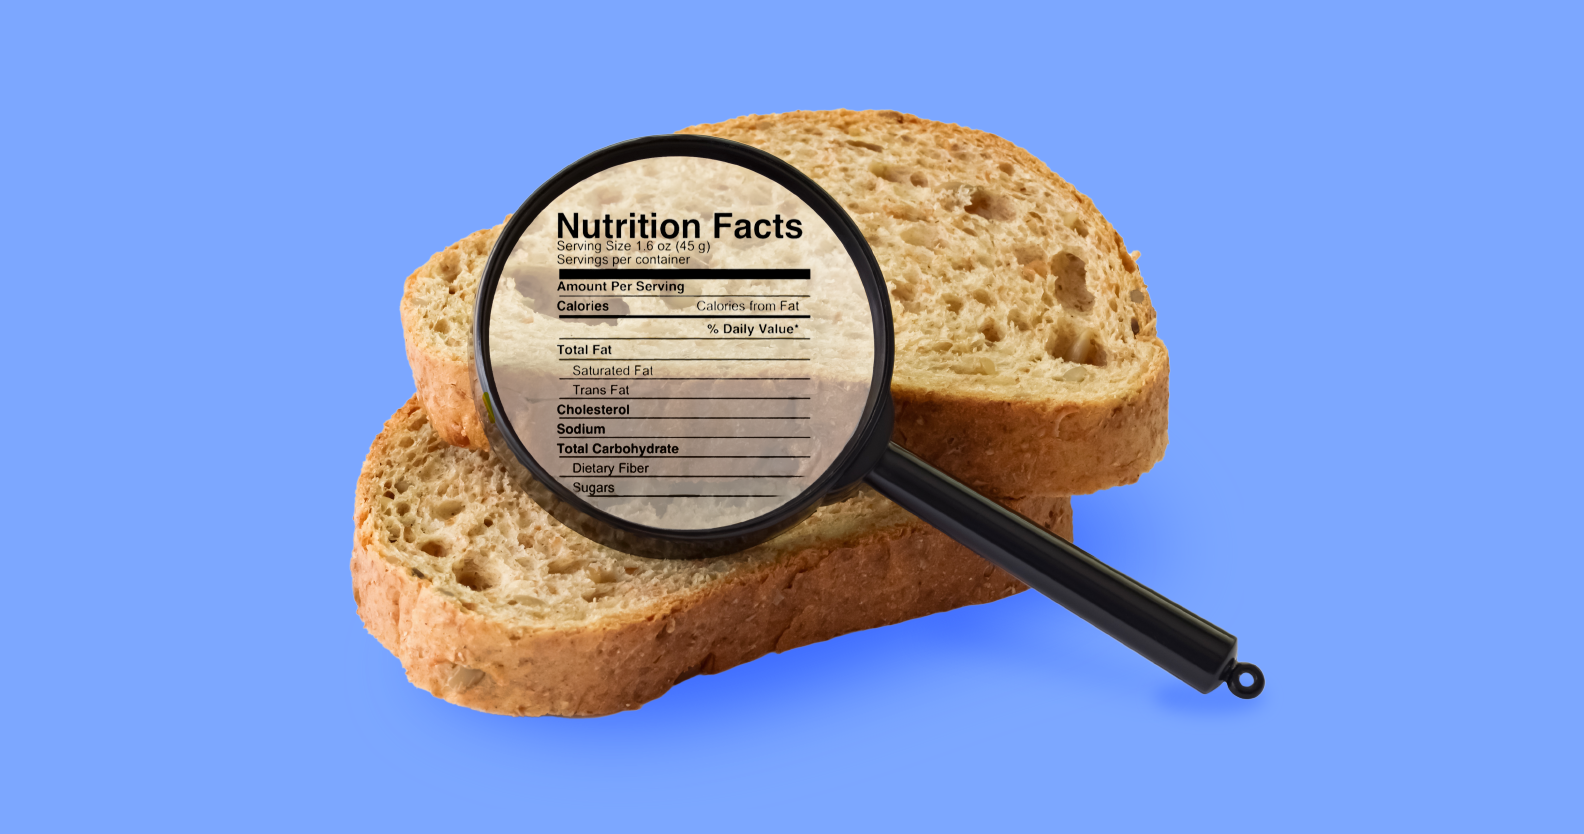 Nutrition Facts: Your Guide to Reading the Label